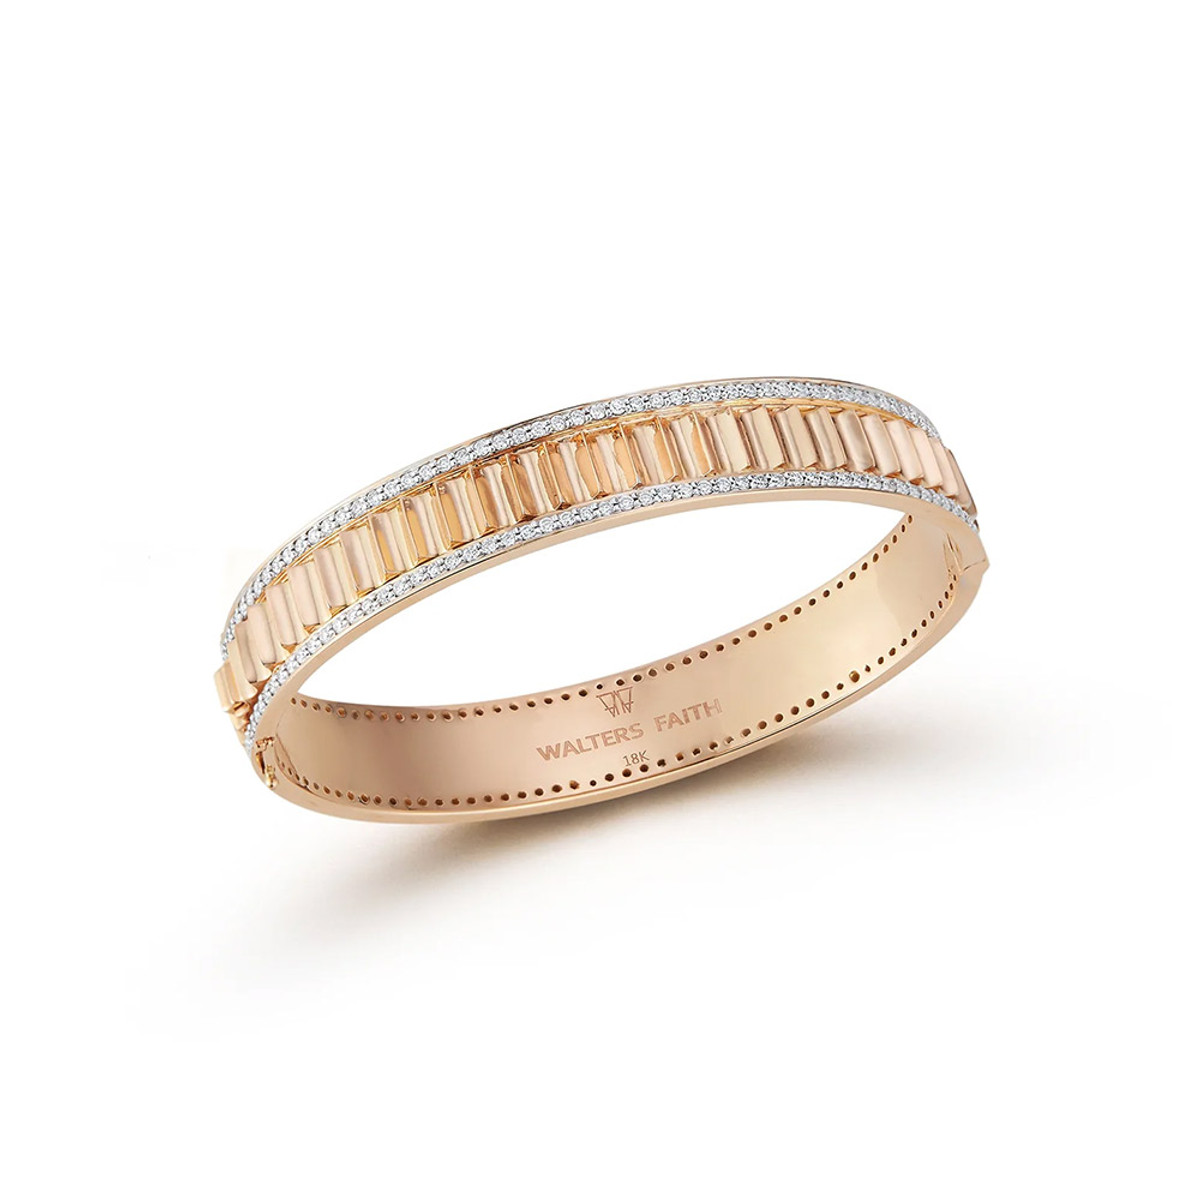 Walters Faith Clive 18K Rose Gold and Diamond Edge Fluted Cuff Bangle-47173 Product Image